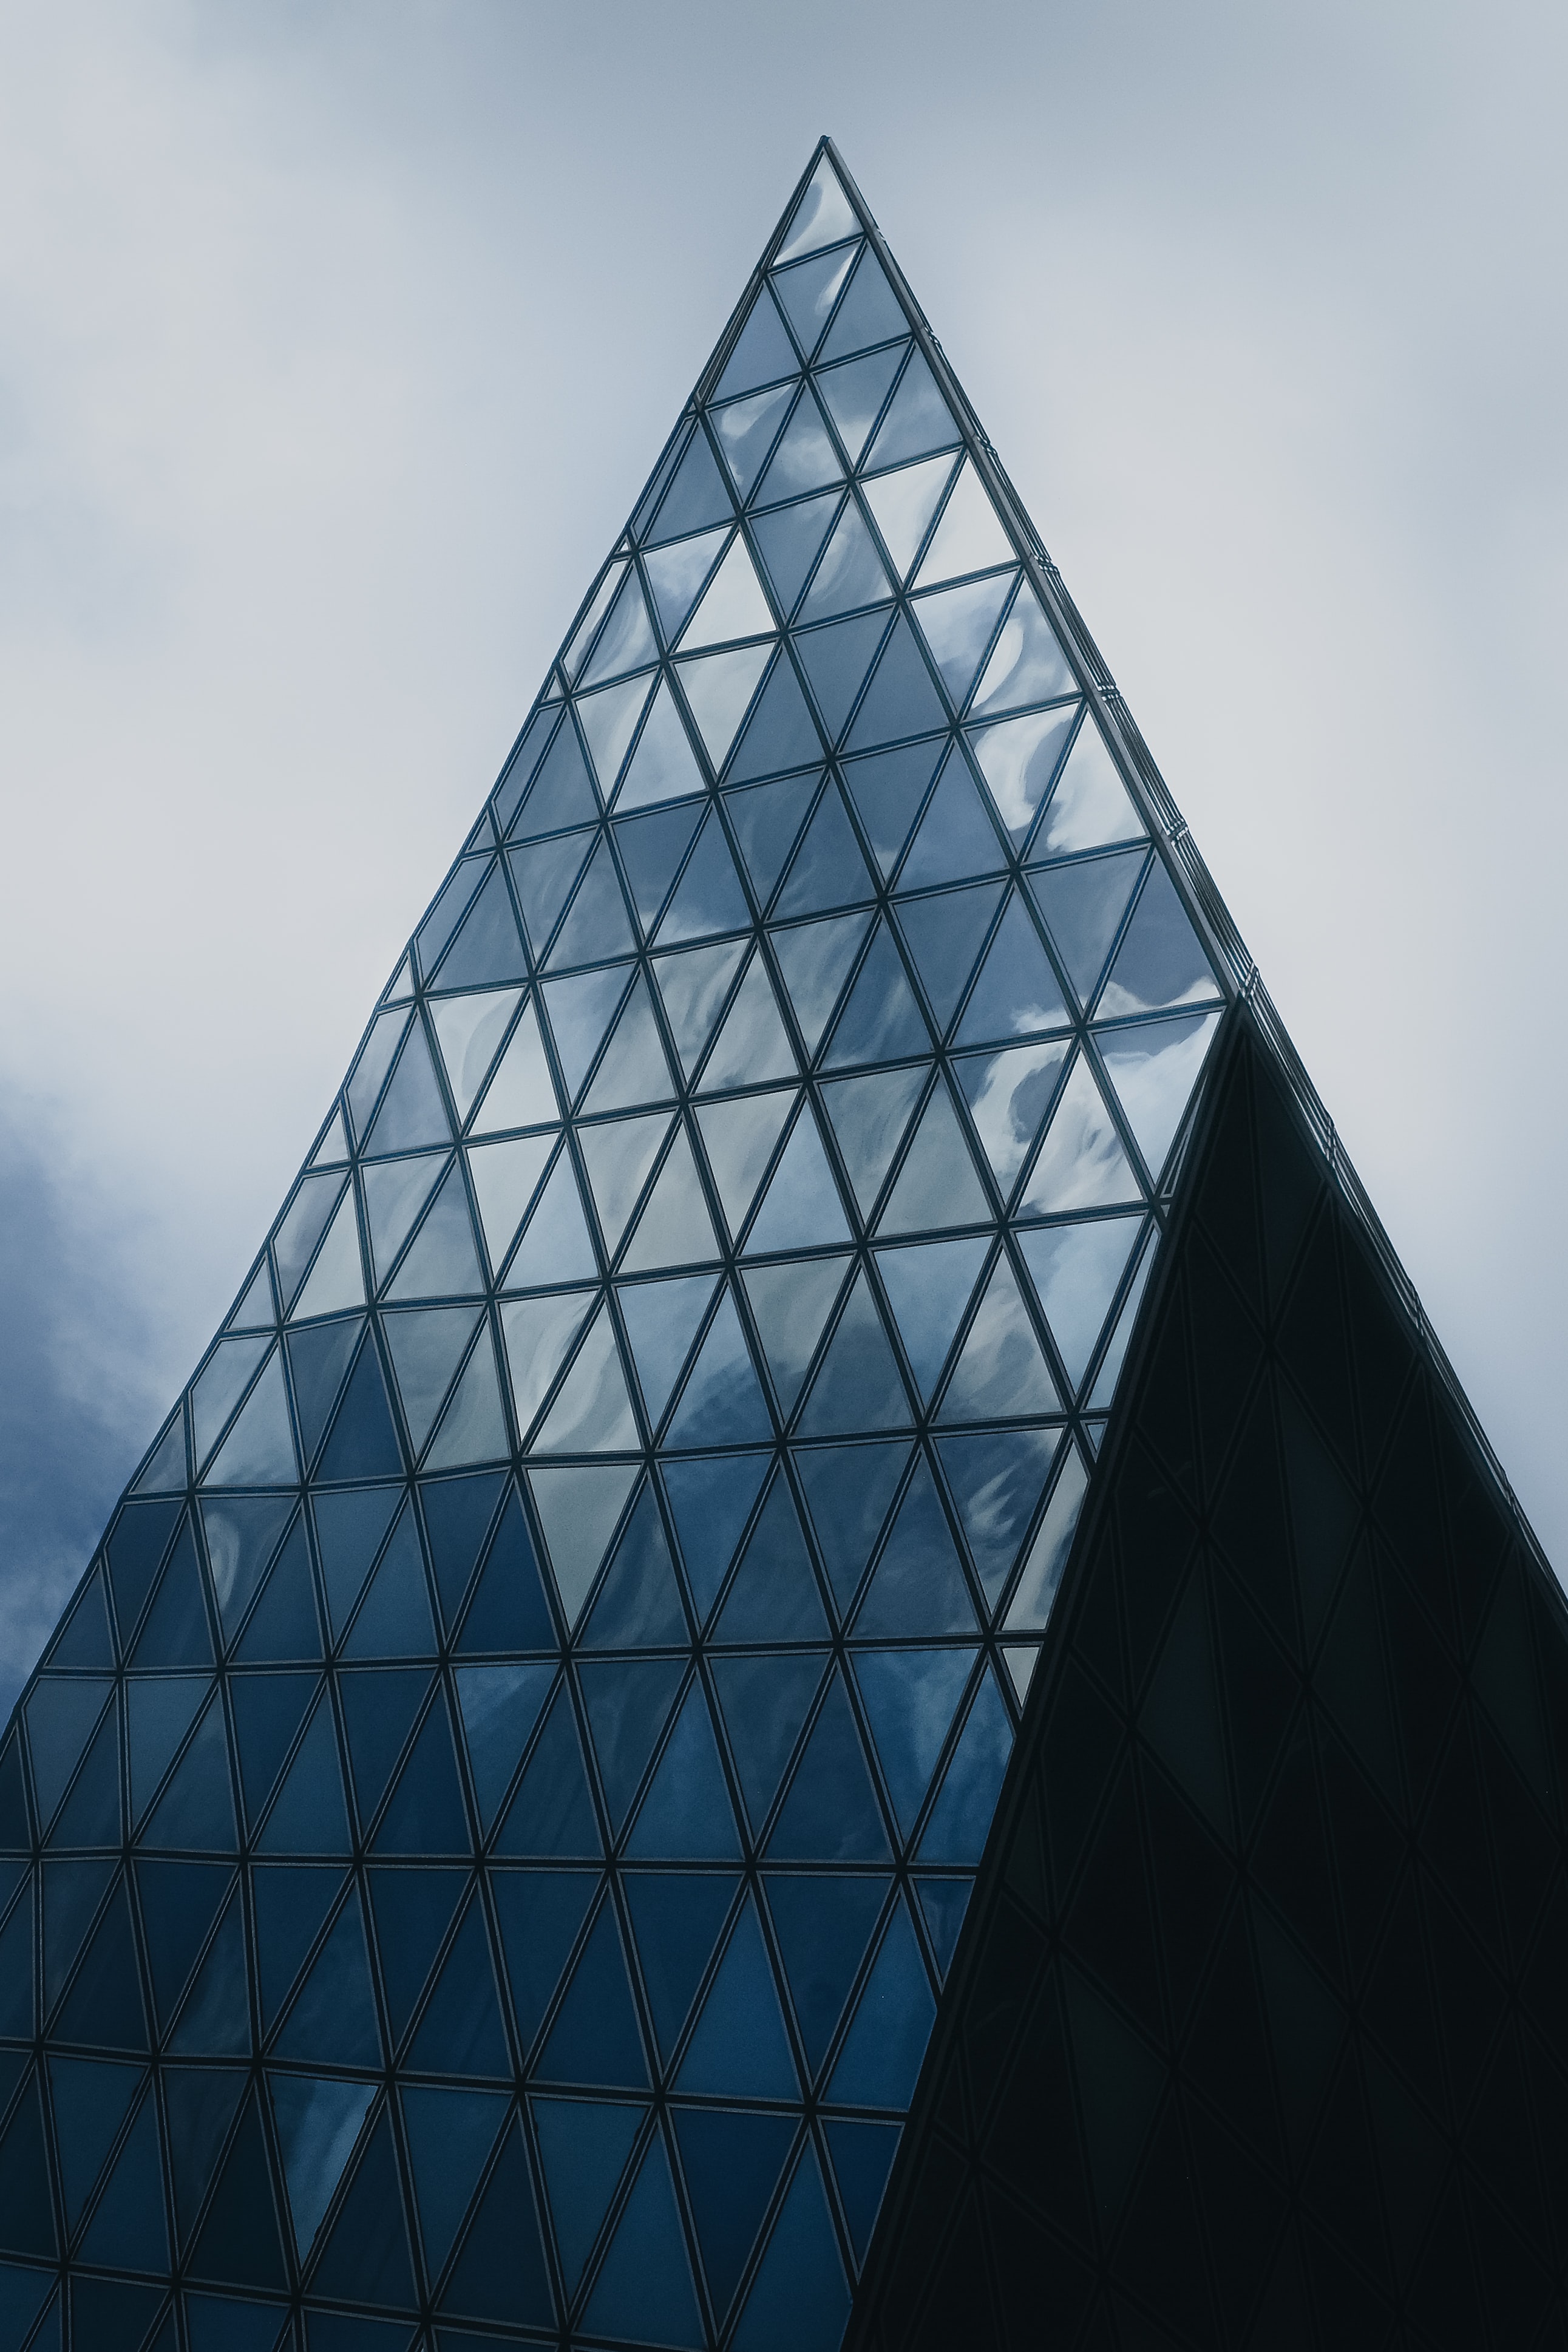 58003 Screensavers and Wallpapers Pyramid for phone. Download architecture, building, miscellanea, miscellaneous, glass, pyramid pictures for free